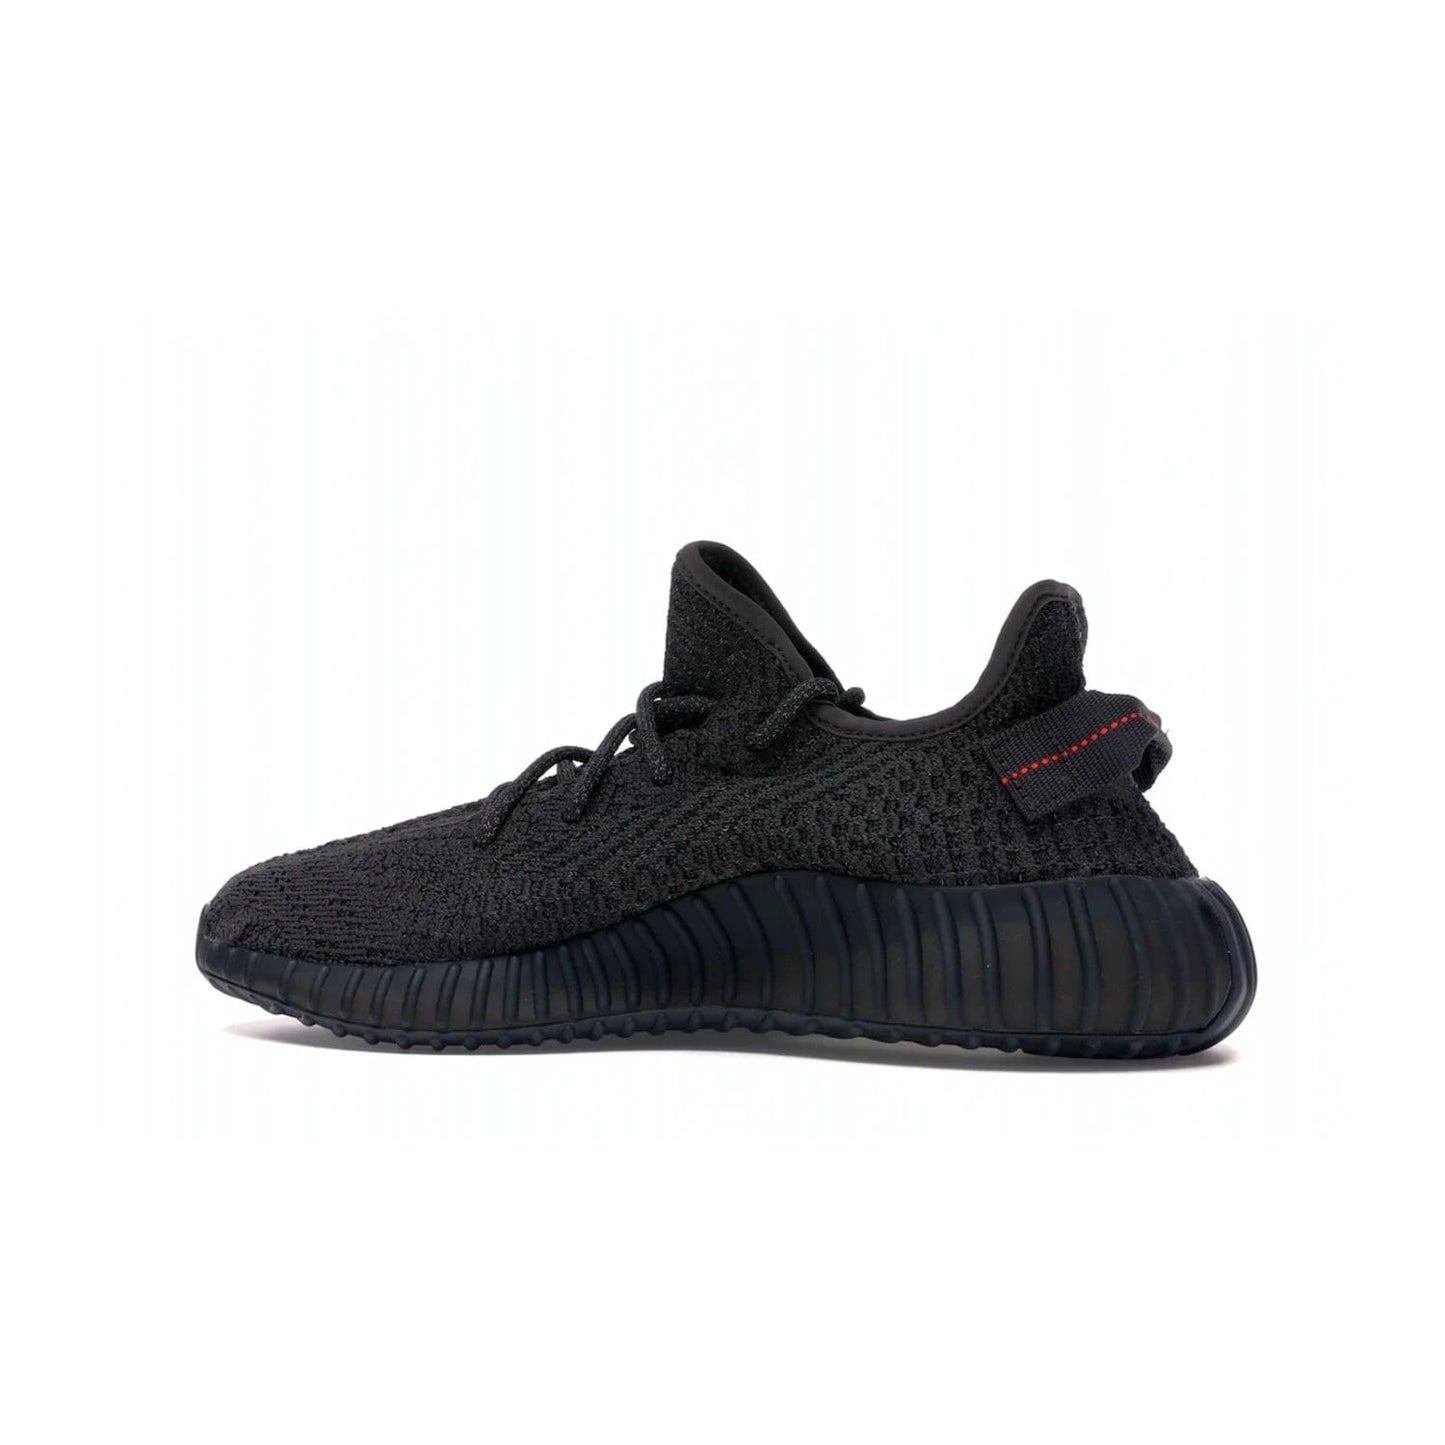 adidas Yeezy Boost 350 V2 Static Black (Reflective) - Image 21 - Only at www.BallersClubKickz.com - Make a statement with the adidas Yeezy Boost 350 V2 Static Black Reflective. All-black upper, reflective accents, midsole, and sole combine for a stylish look. High quality materials. June 2019 release. Add to your collection today.